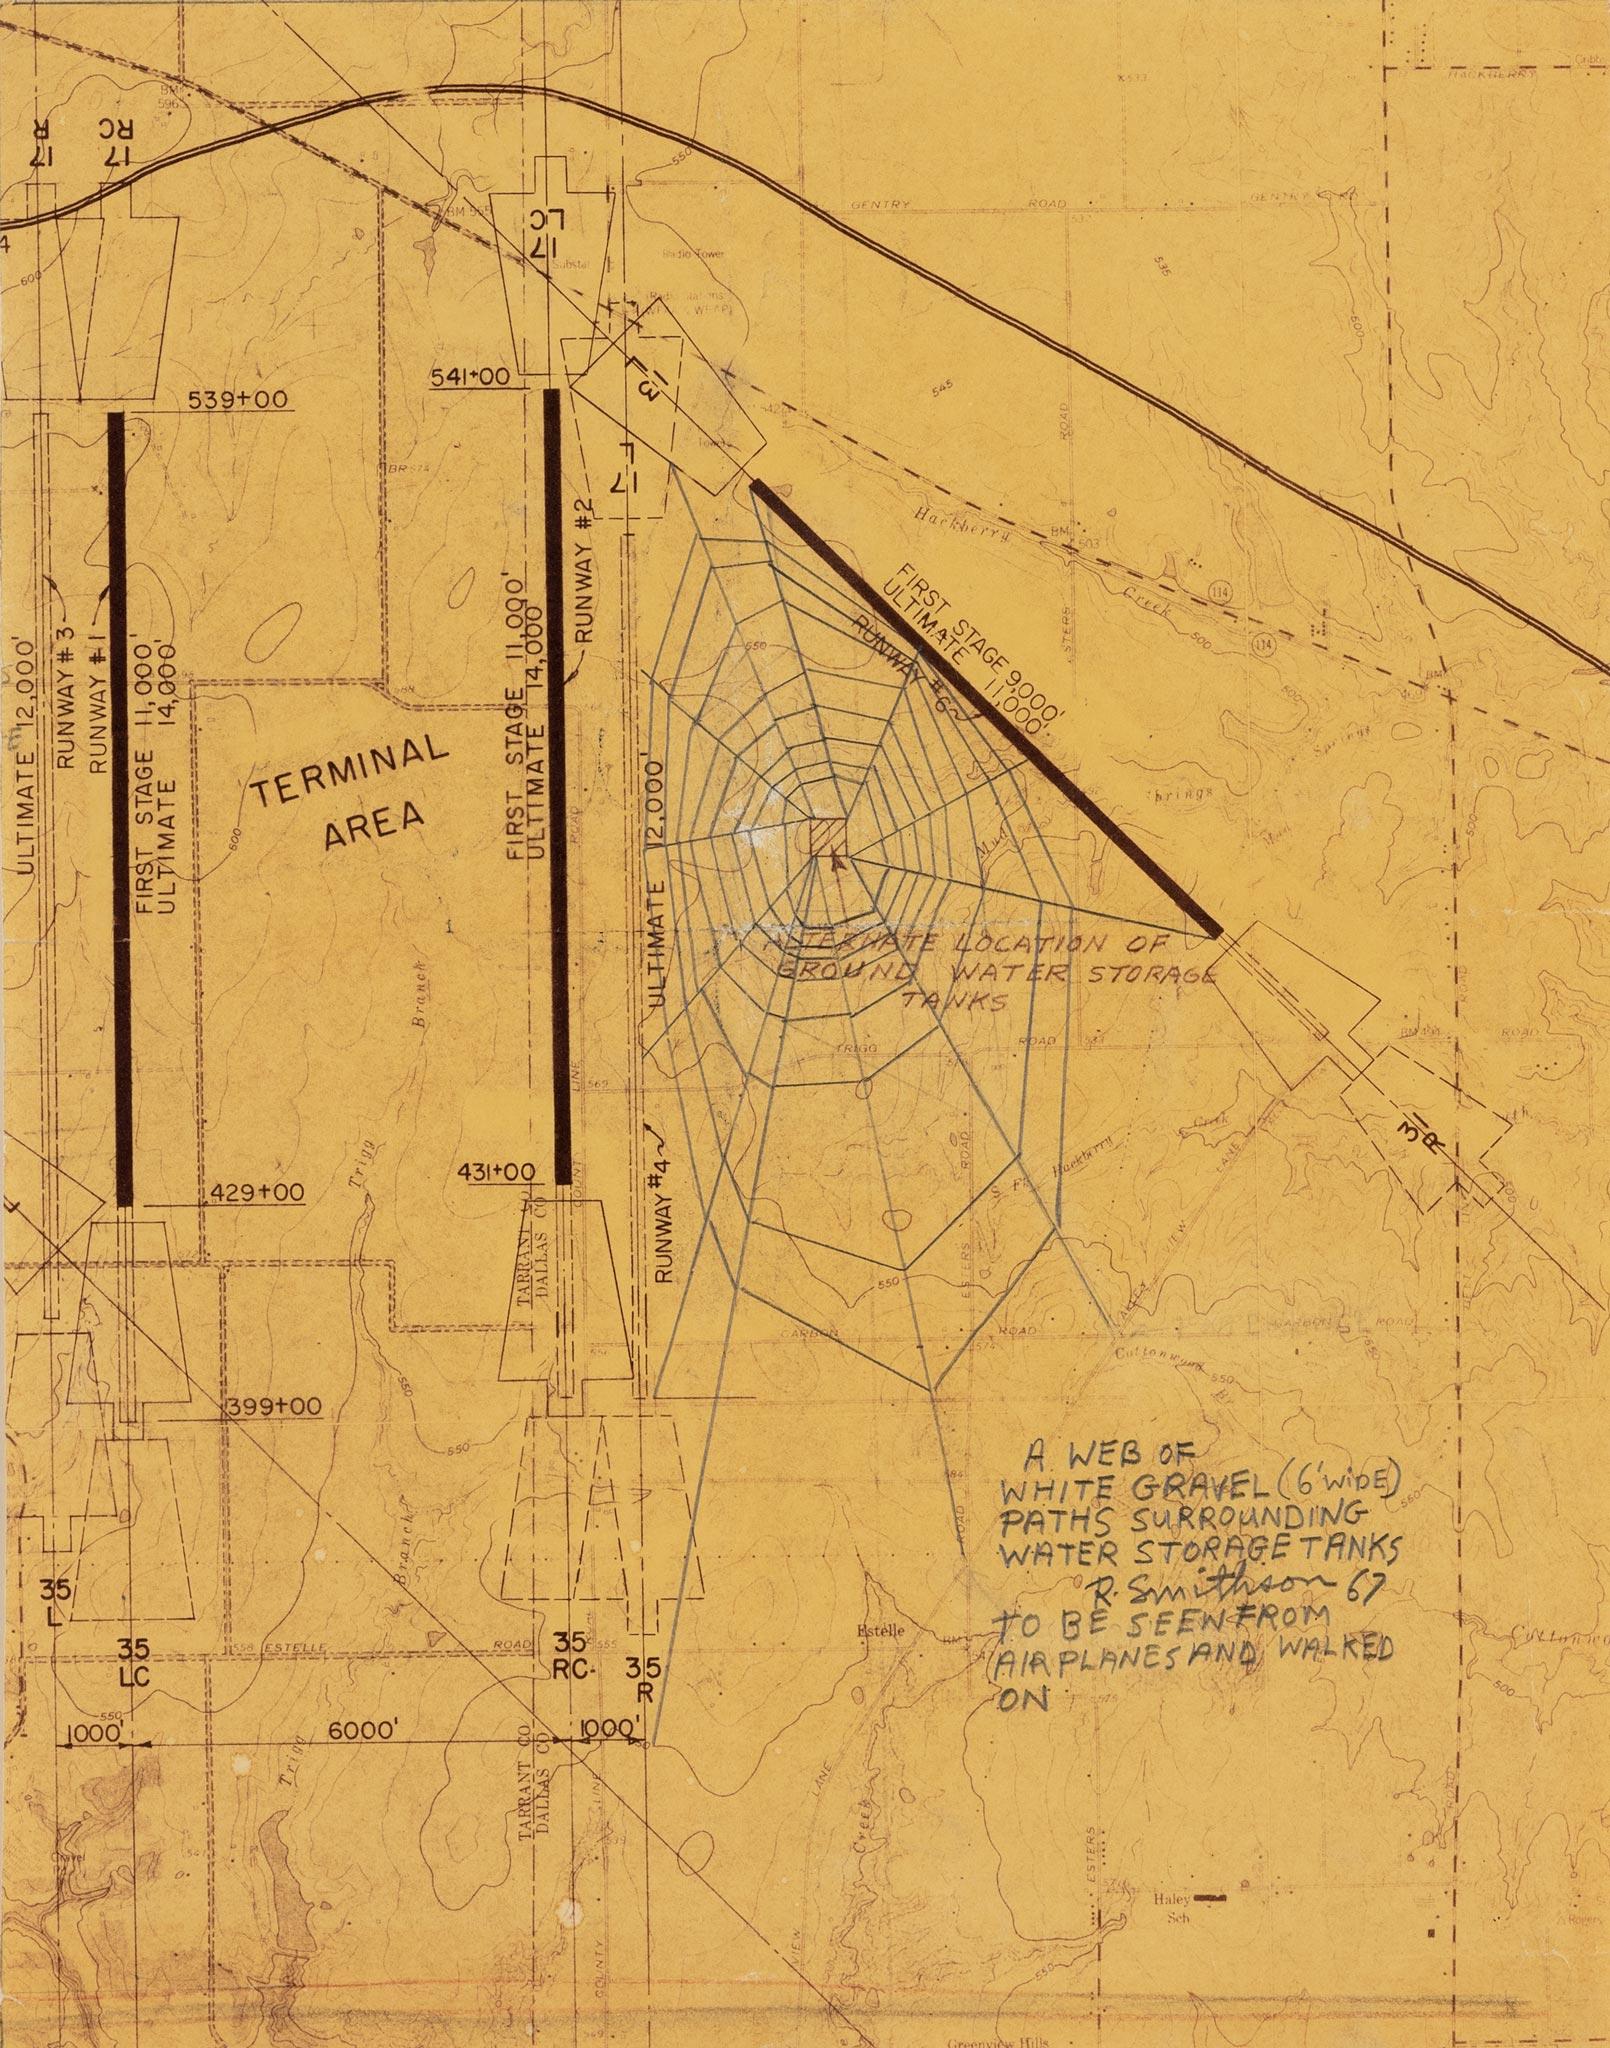 yellow paper featuring a web-like drawing proposing paths near an airport terminal